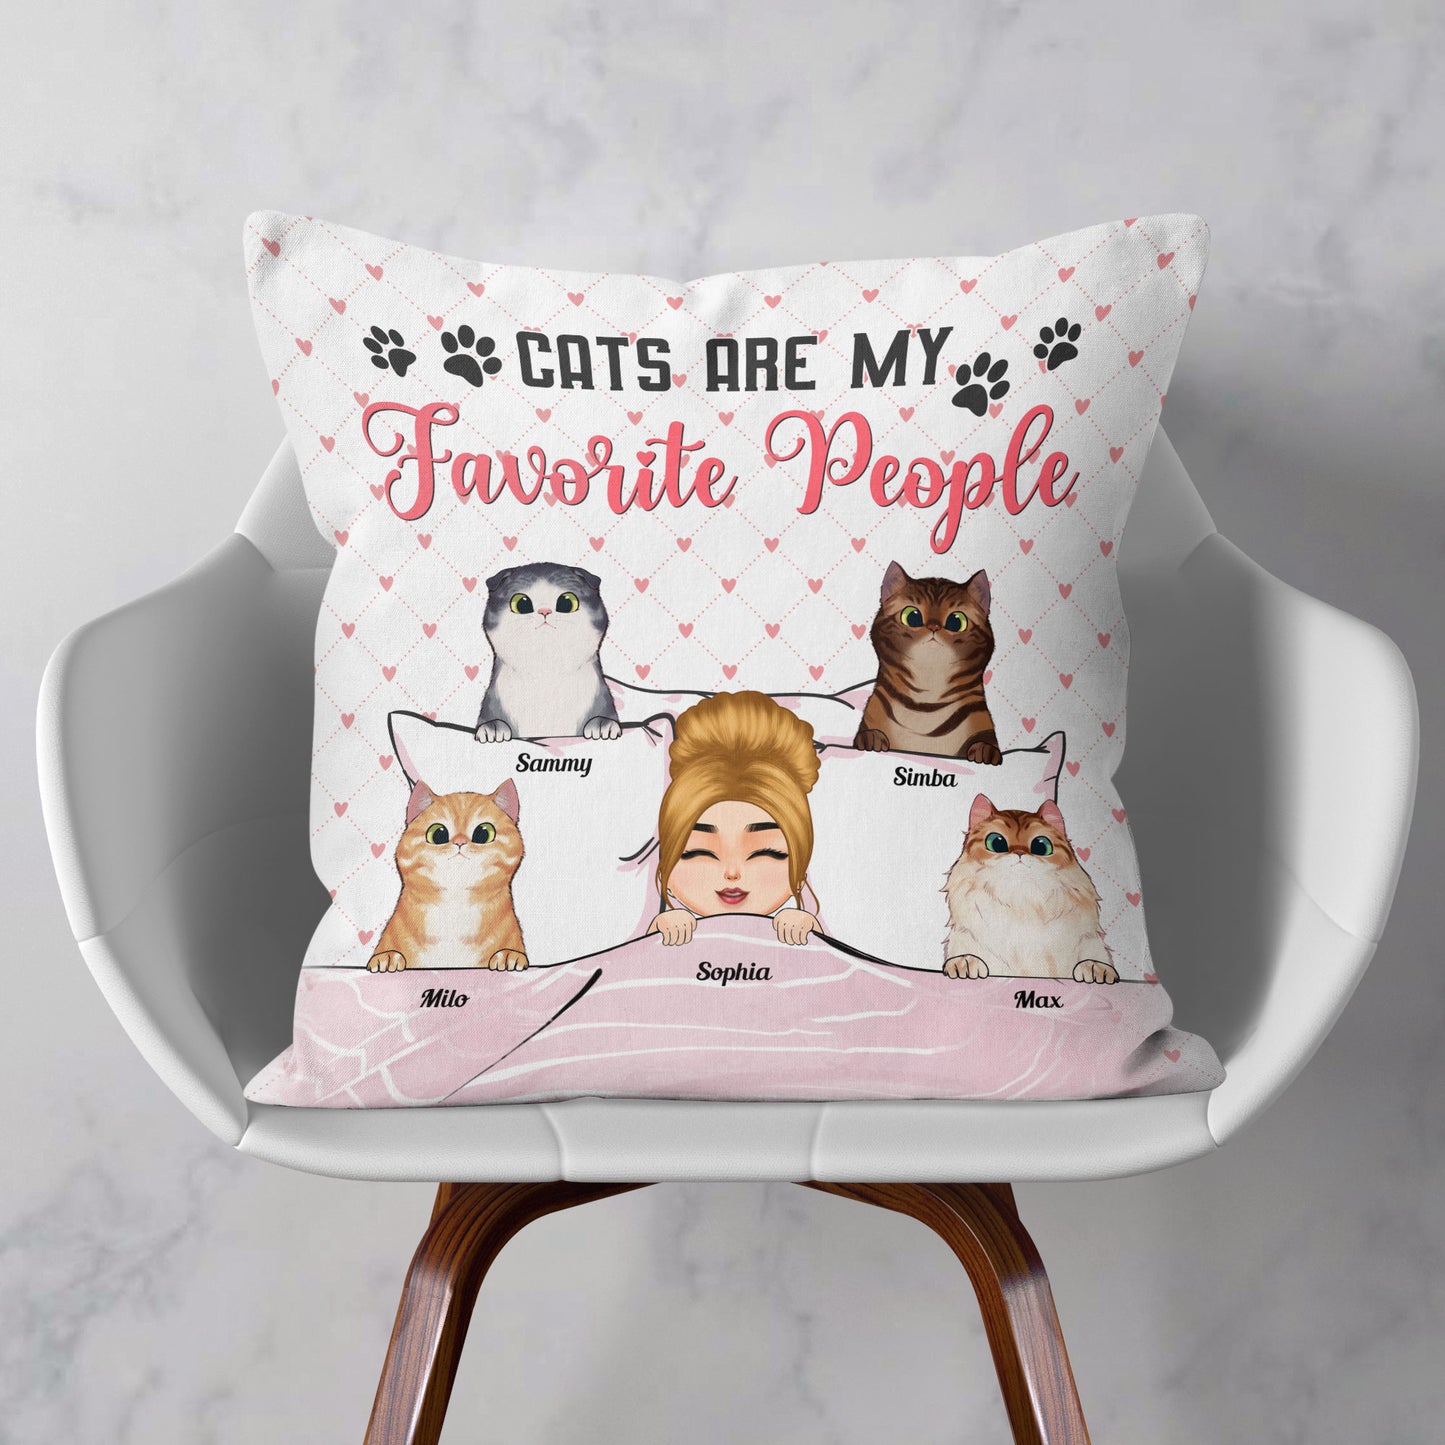 Cats Are My Favorite People - Personalized Pillow (Insert Included) - Birthday, Loving Gift For Cat Mom, Cat Lover